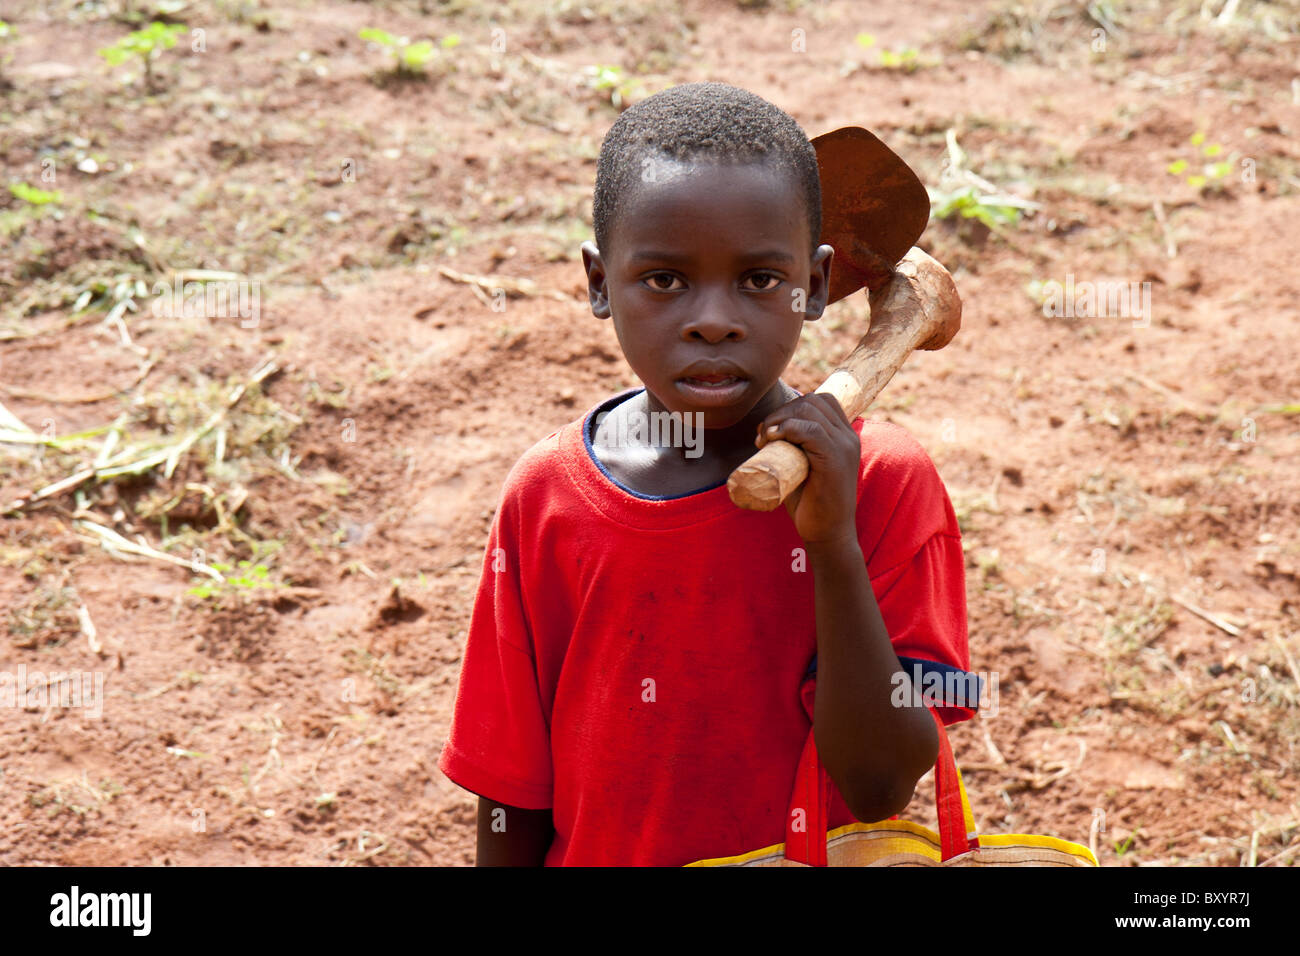 A young African child with a hoe over his should  returns from working in the fields. Stock Photo